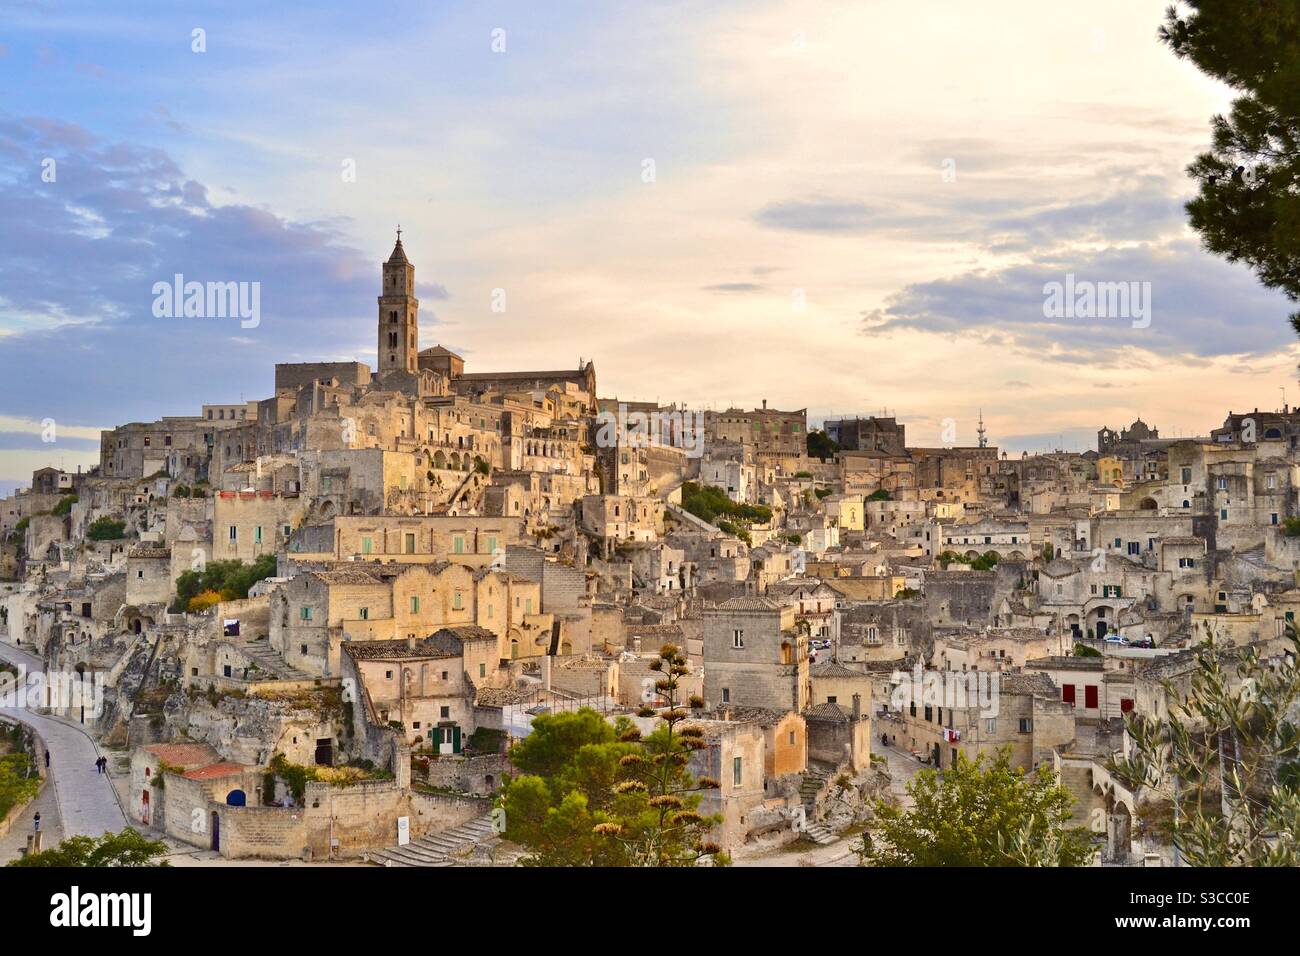 The most magical and beautiful ancient hilltop town of Matera in southern Italy at sunset with an opalescent soft sky and golden light shining on the houses and church below Stock Photo